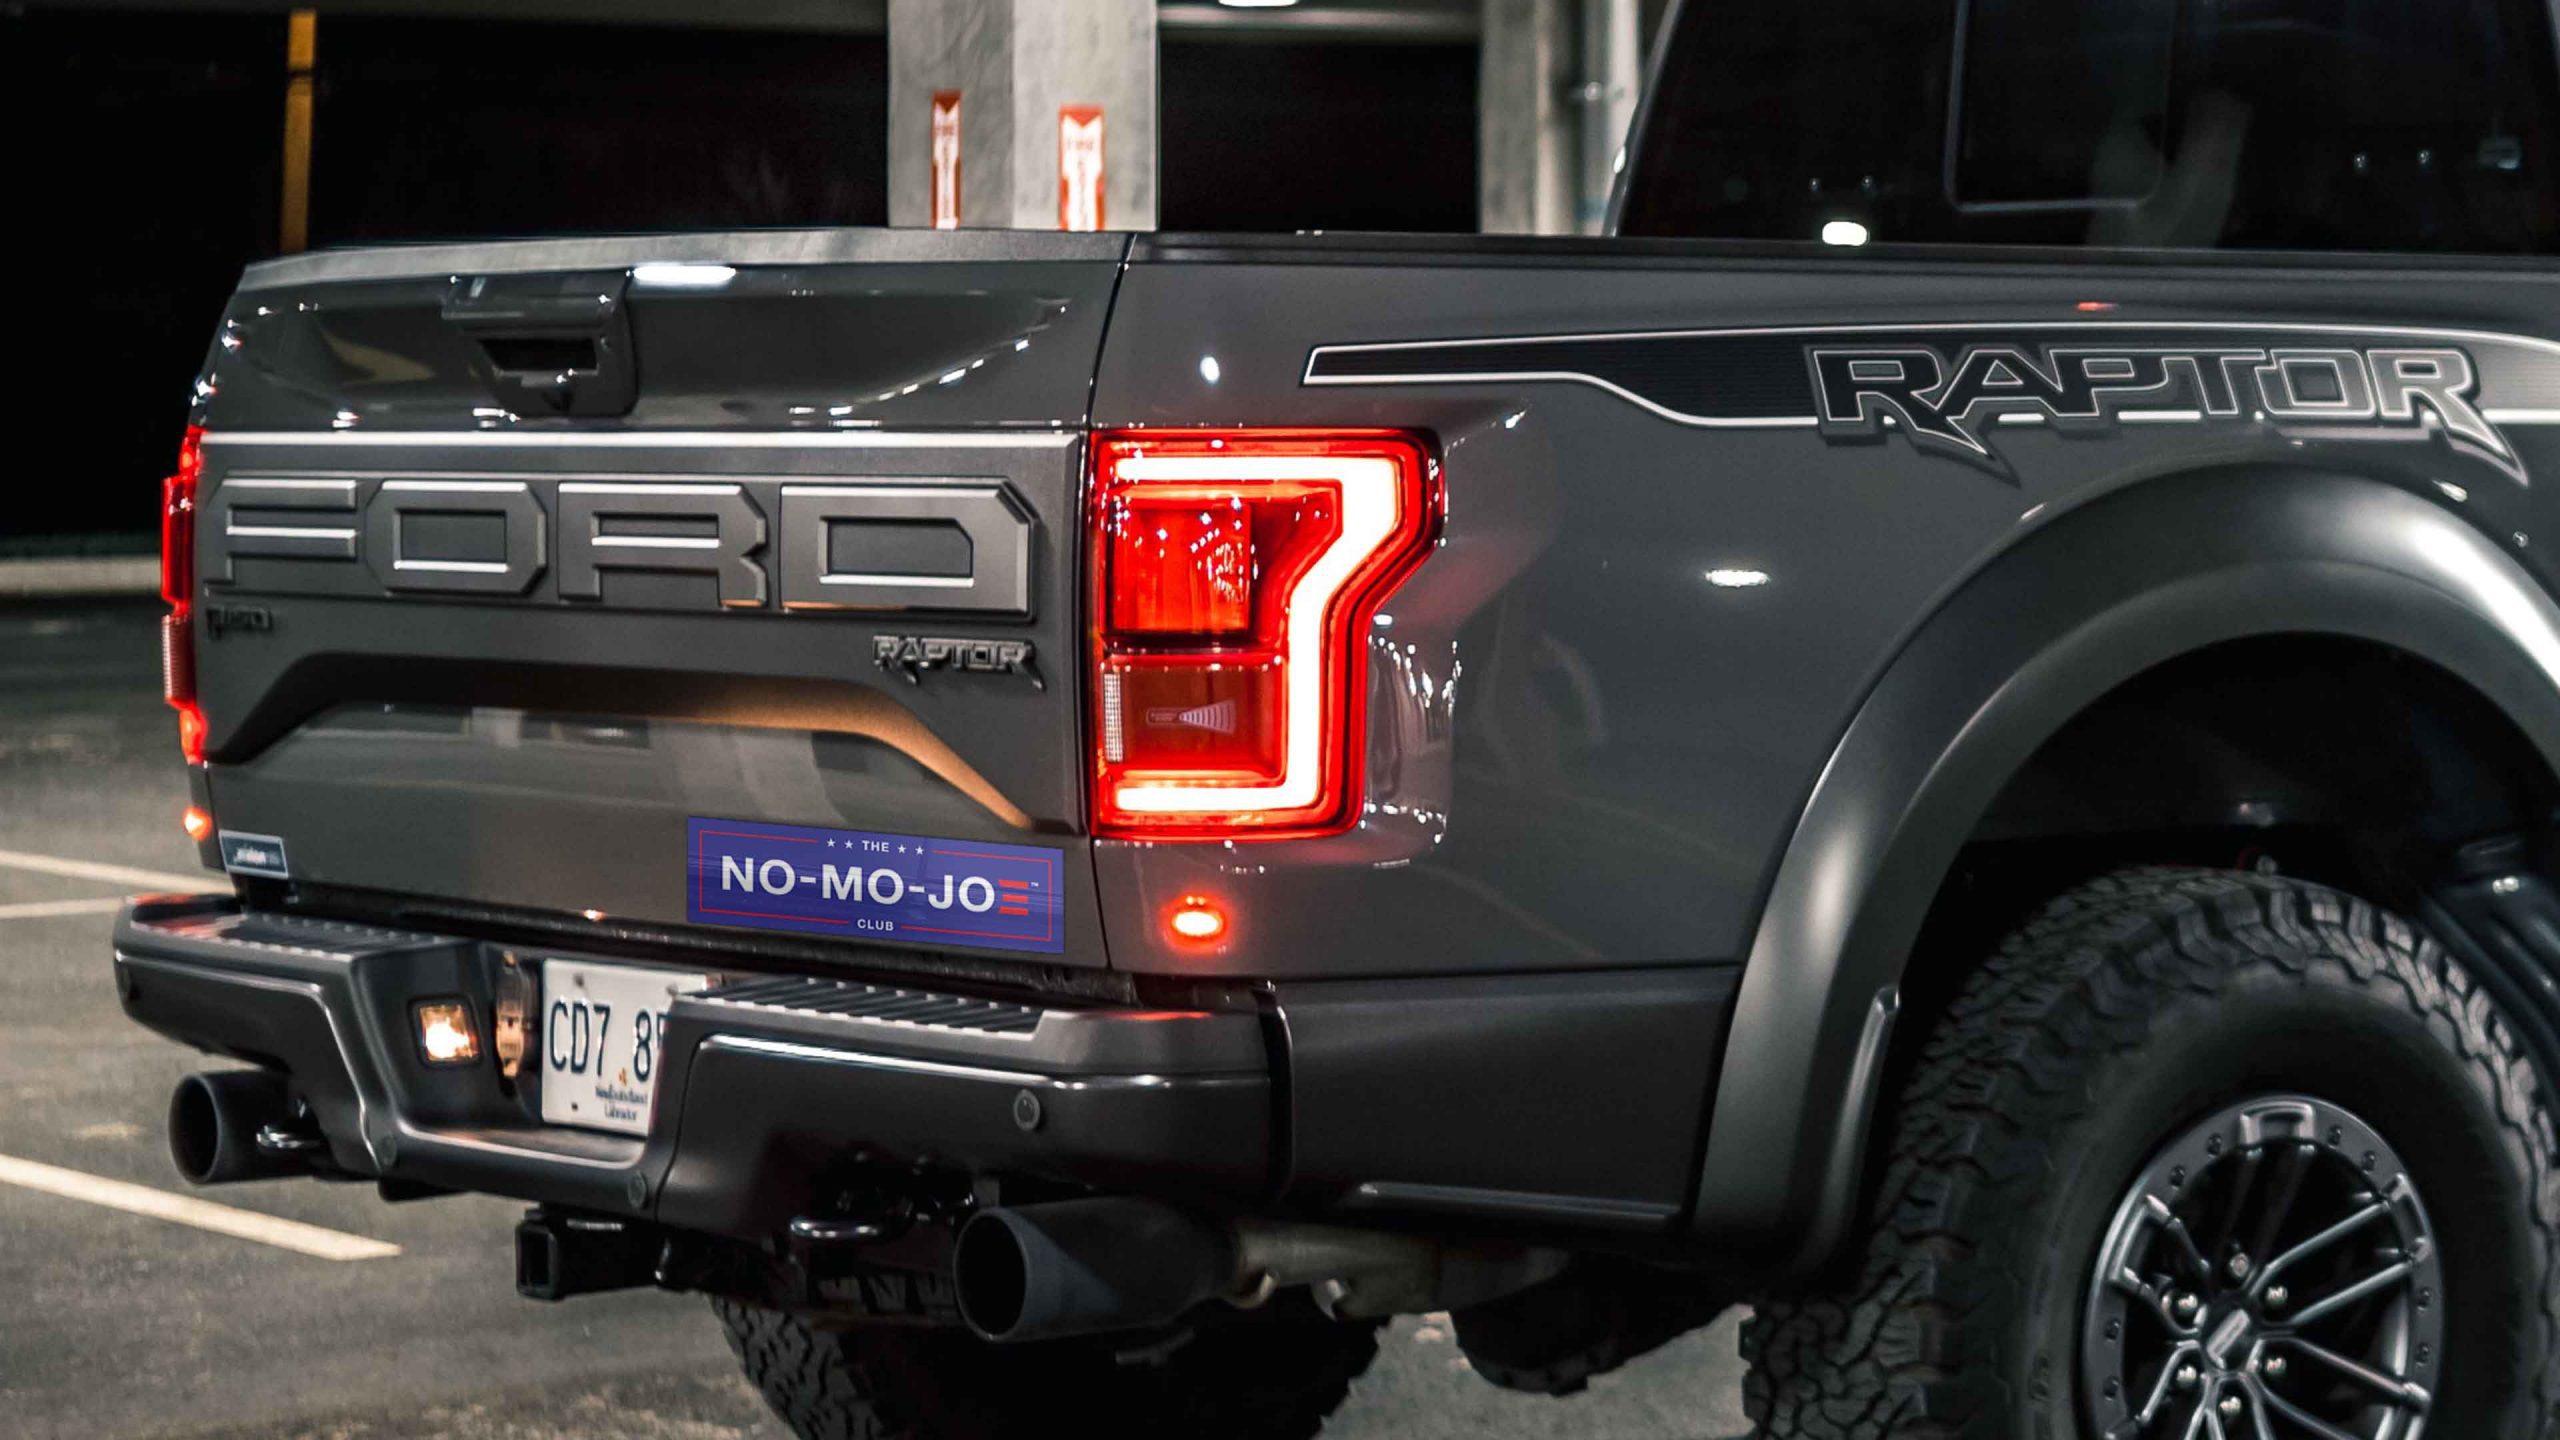 Tail gate of a Gray, loaded Ford Raptor with a The No-Mo-Joe Club™ bumper sticker in a parking garage.